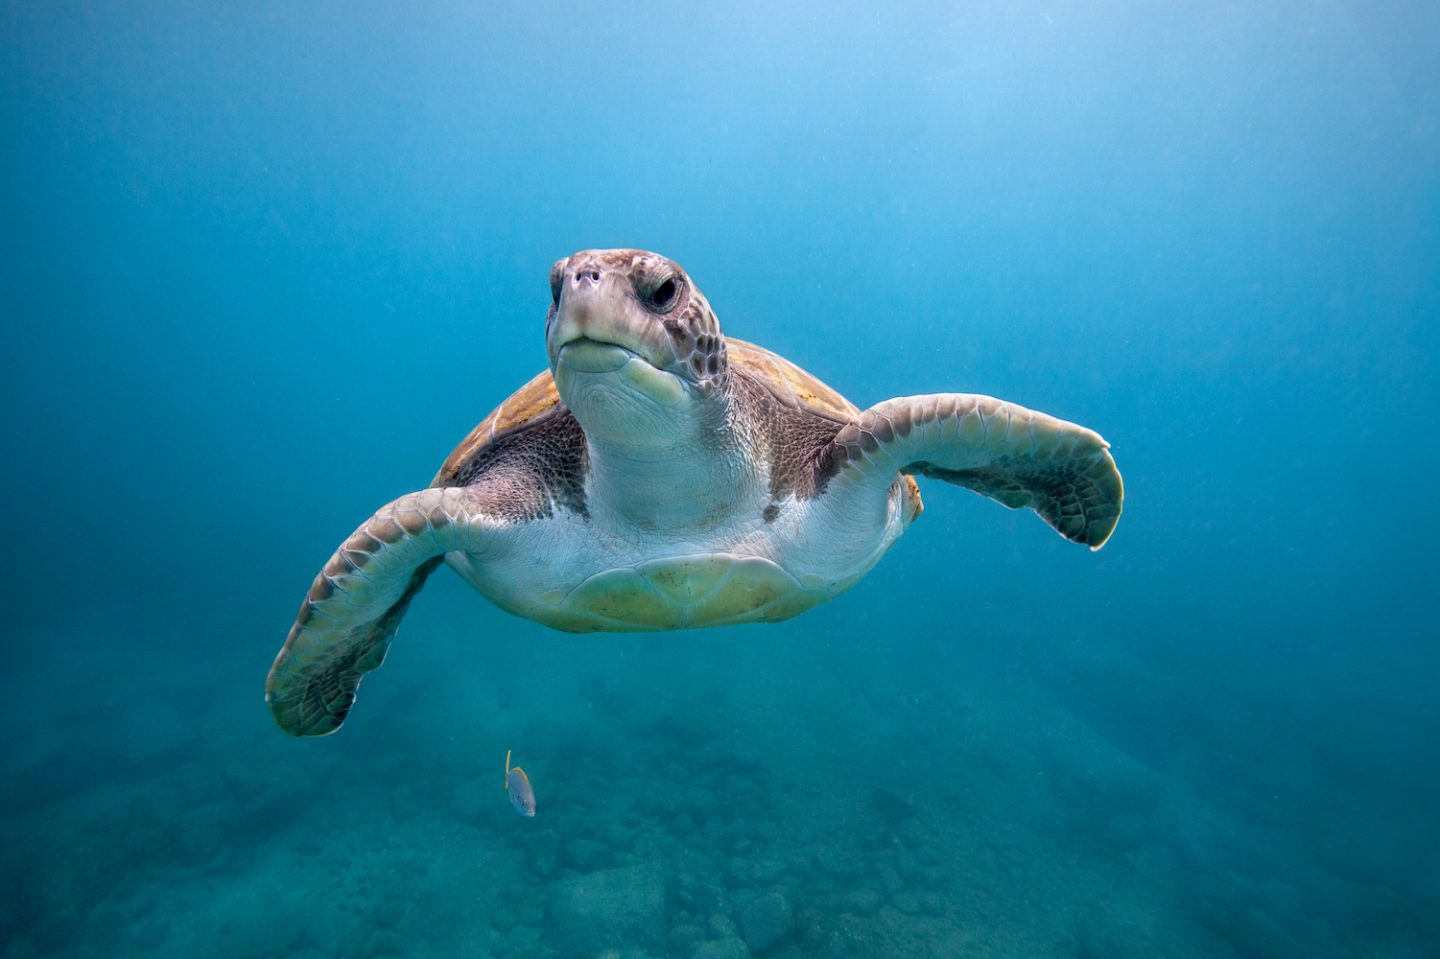 An endangered green sea turtle swims near El Puertito beach on the island of Tenerife in the Canary Islands.